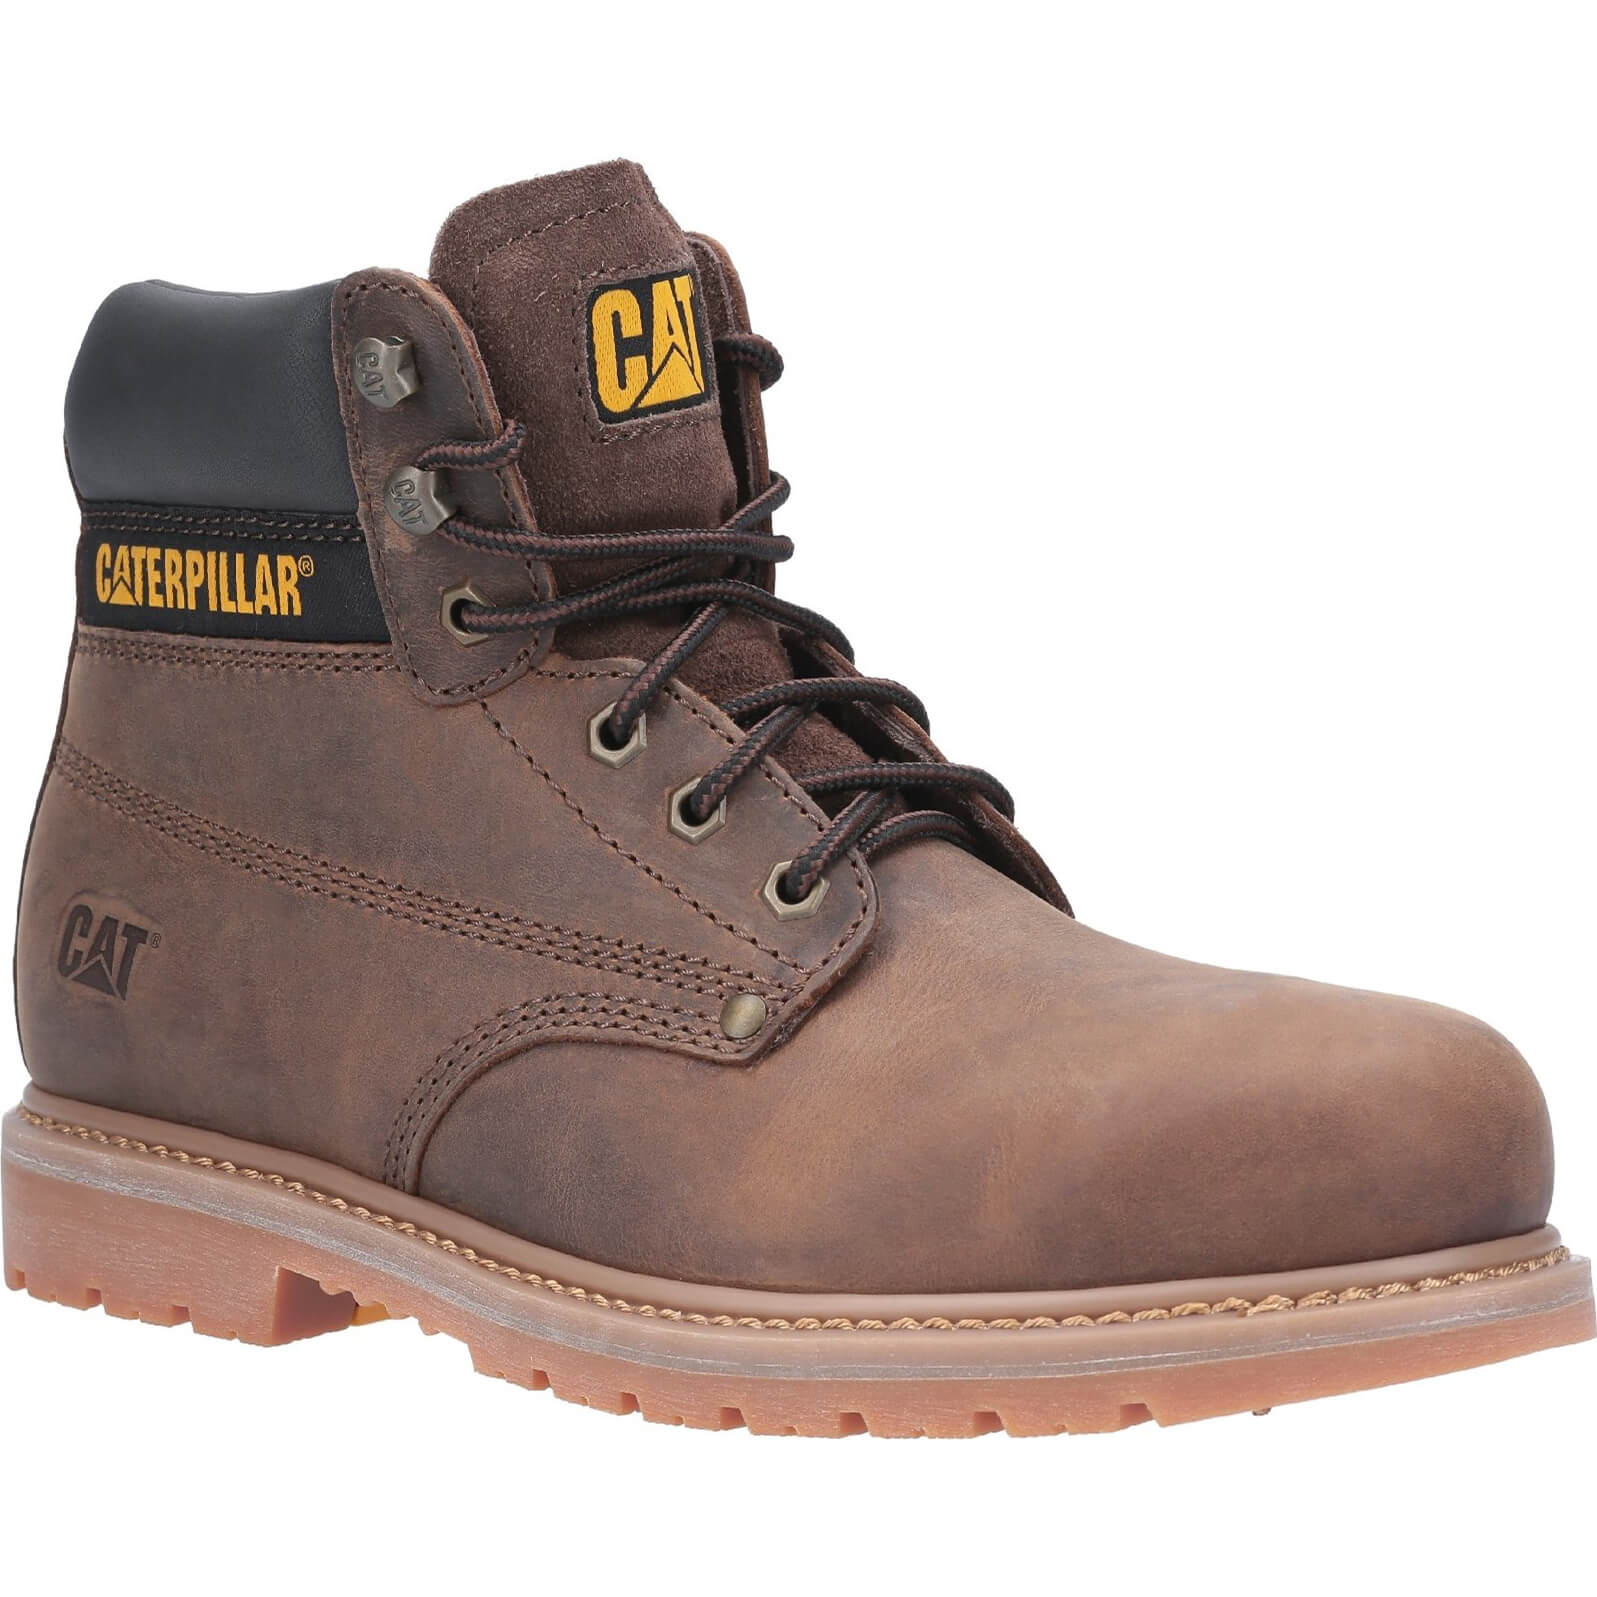 Image of Caterpillar Powerplant GYW Safety Boot Brown Size 9